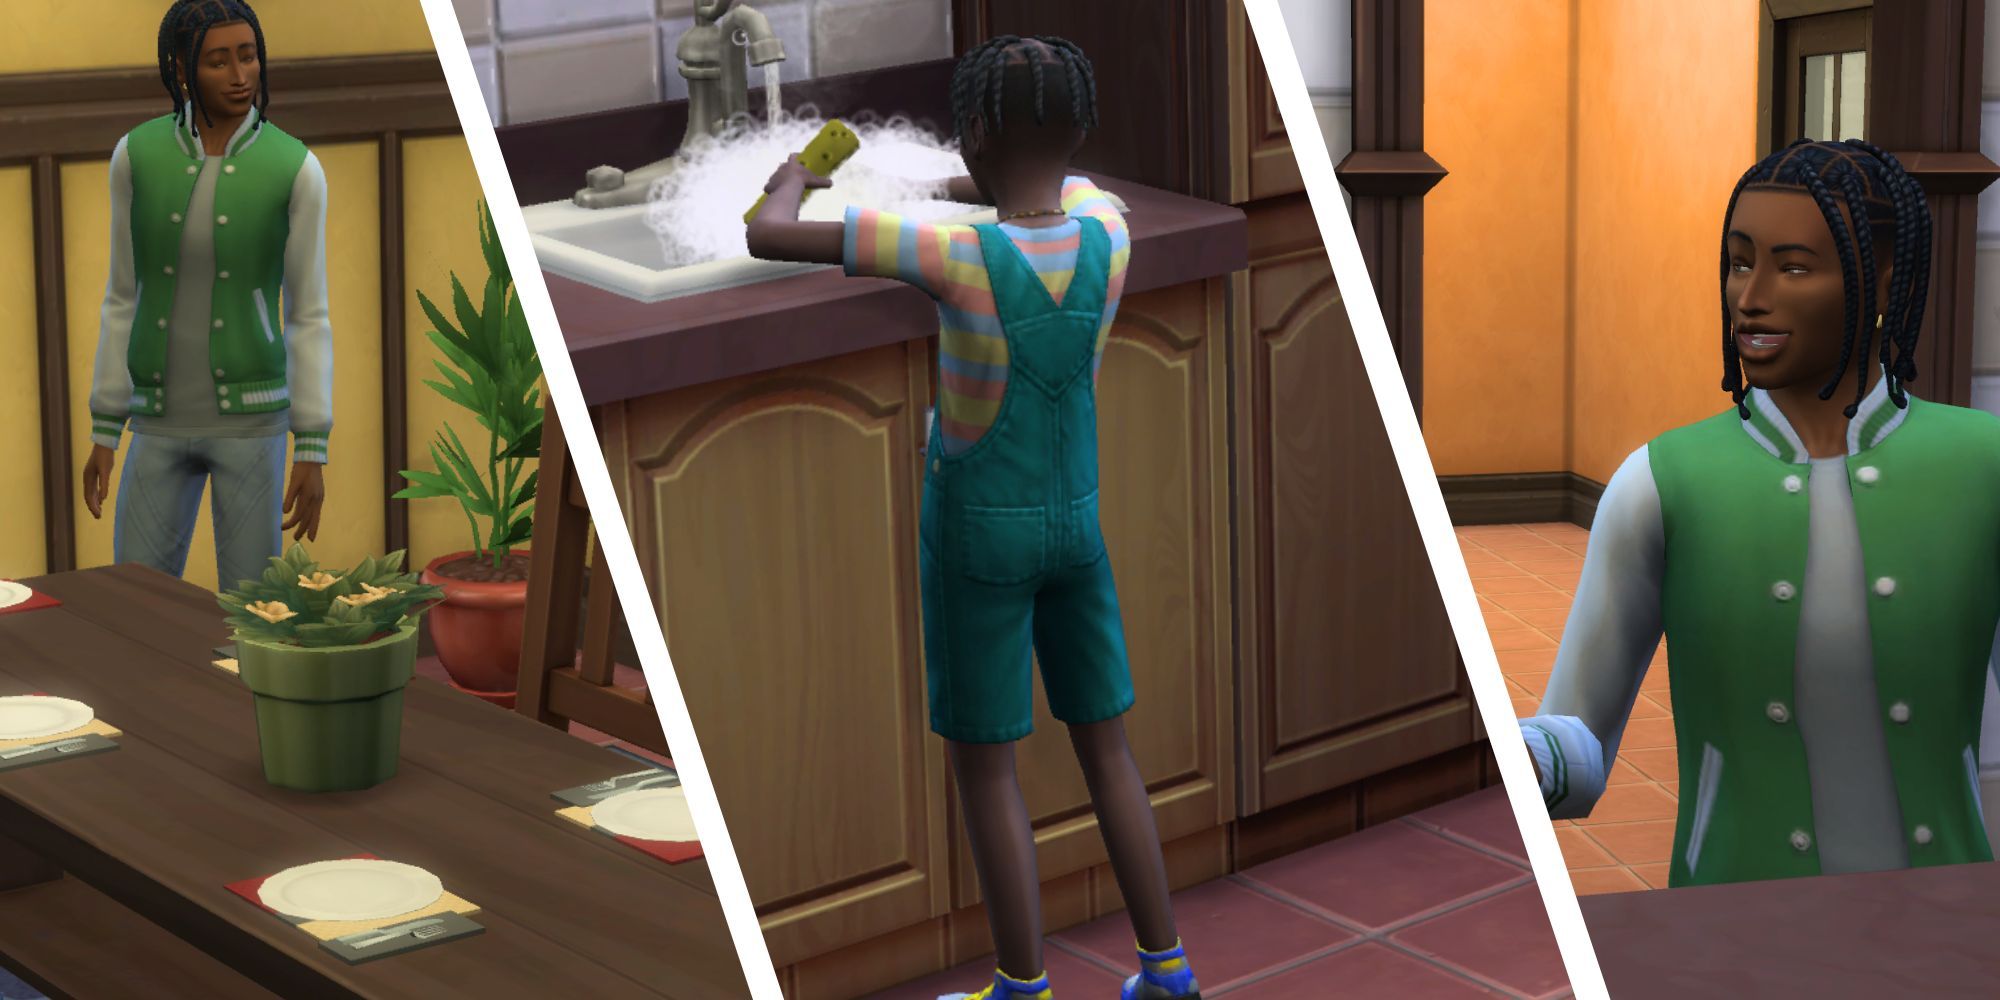 Three panels show a teenage Sim setting the table, a child Sim doing the dishes, and the same teenage Sim politely talking.